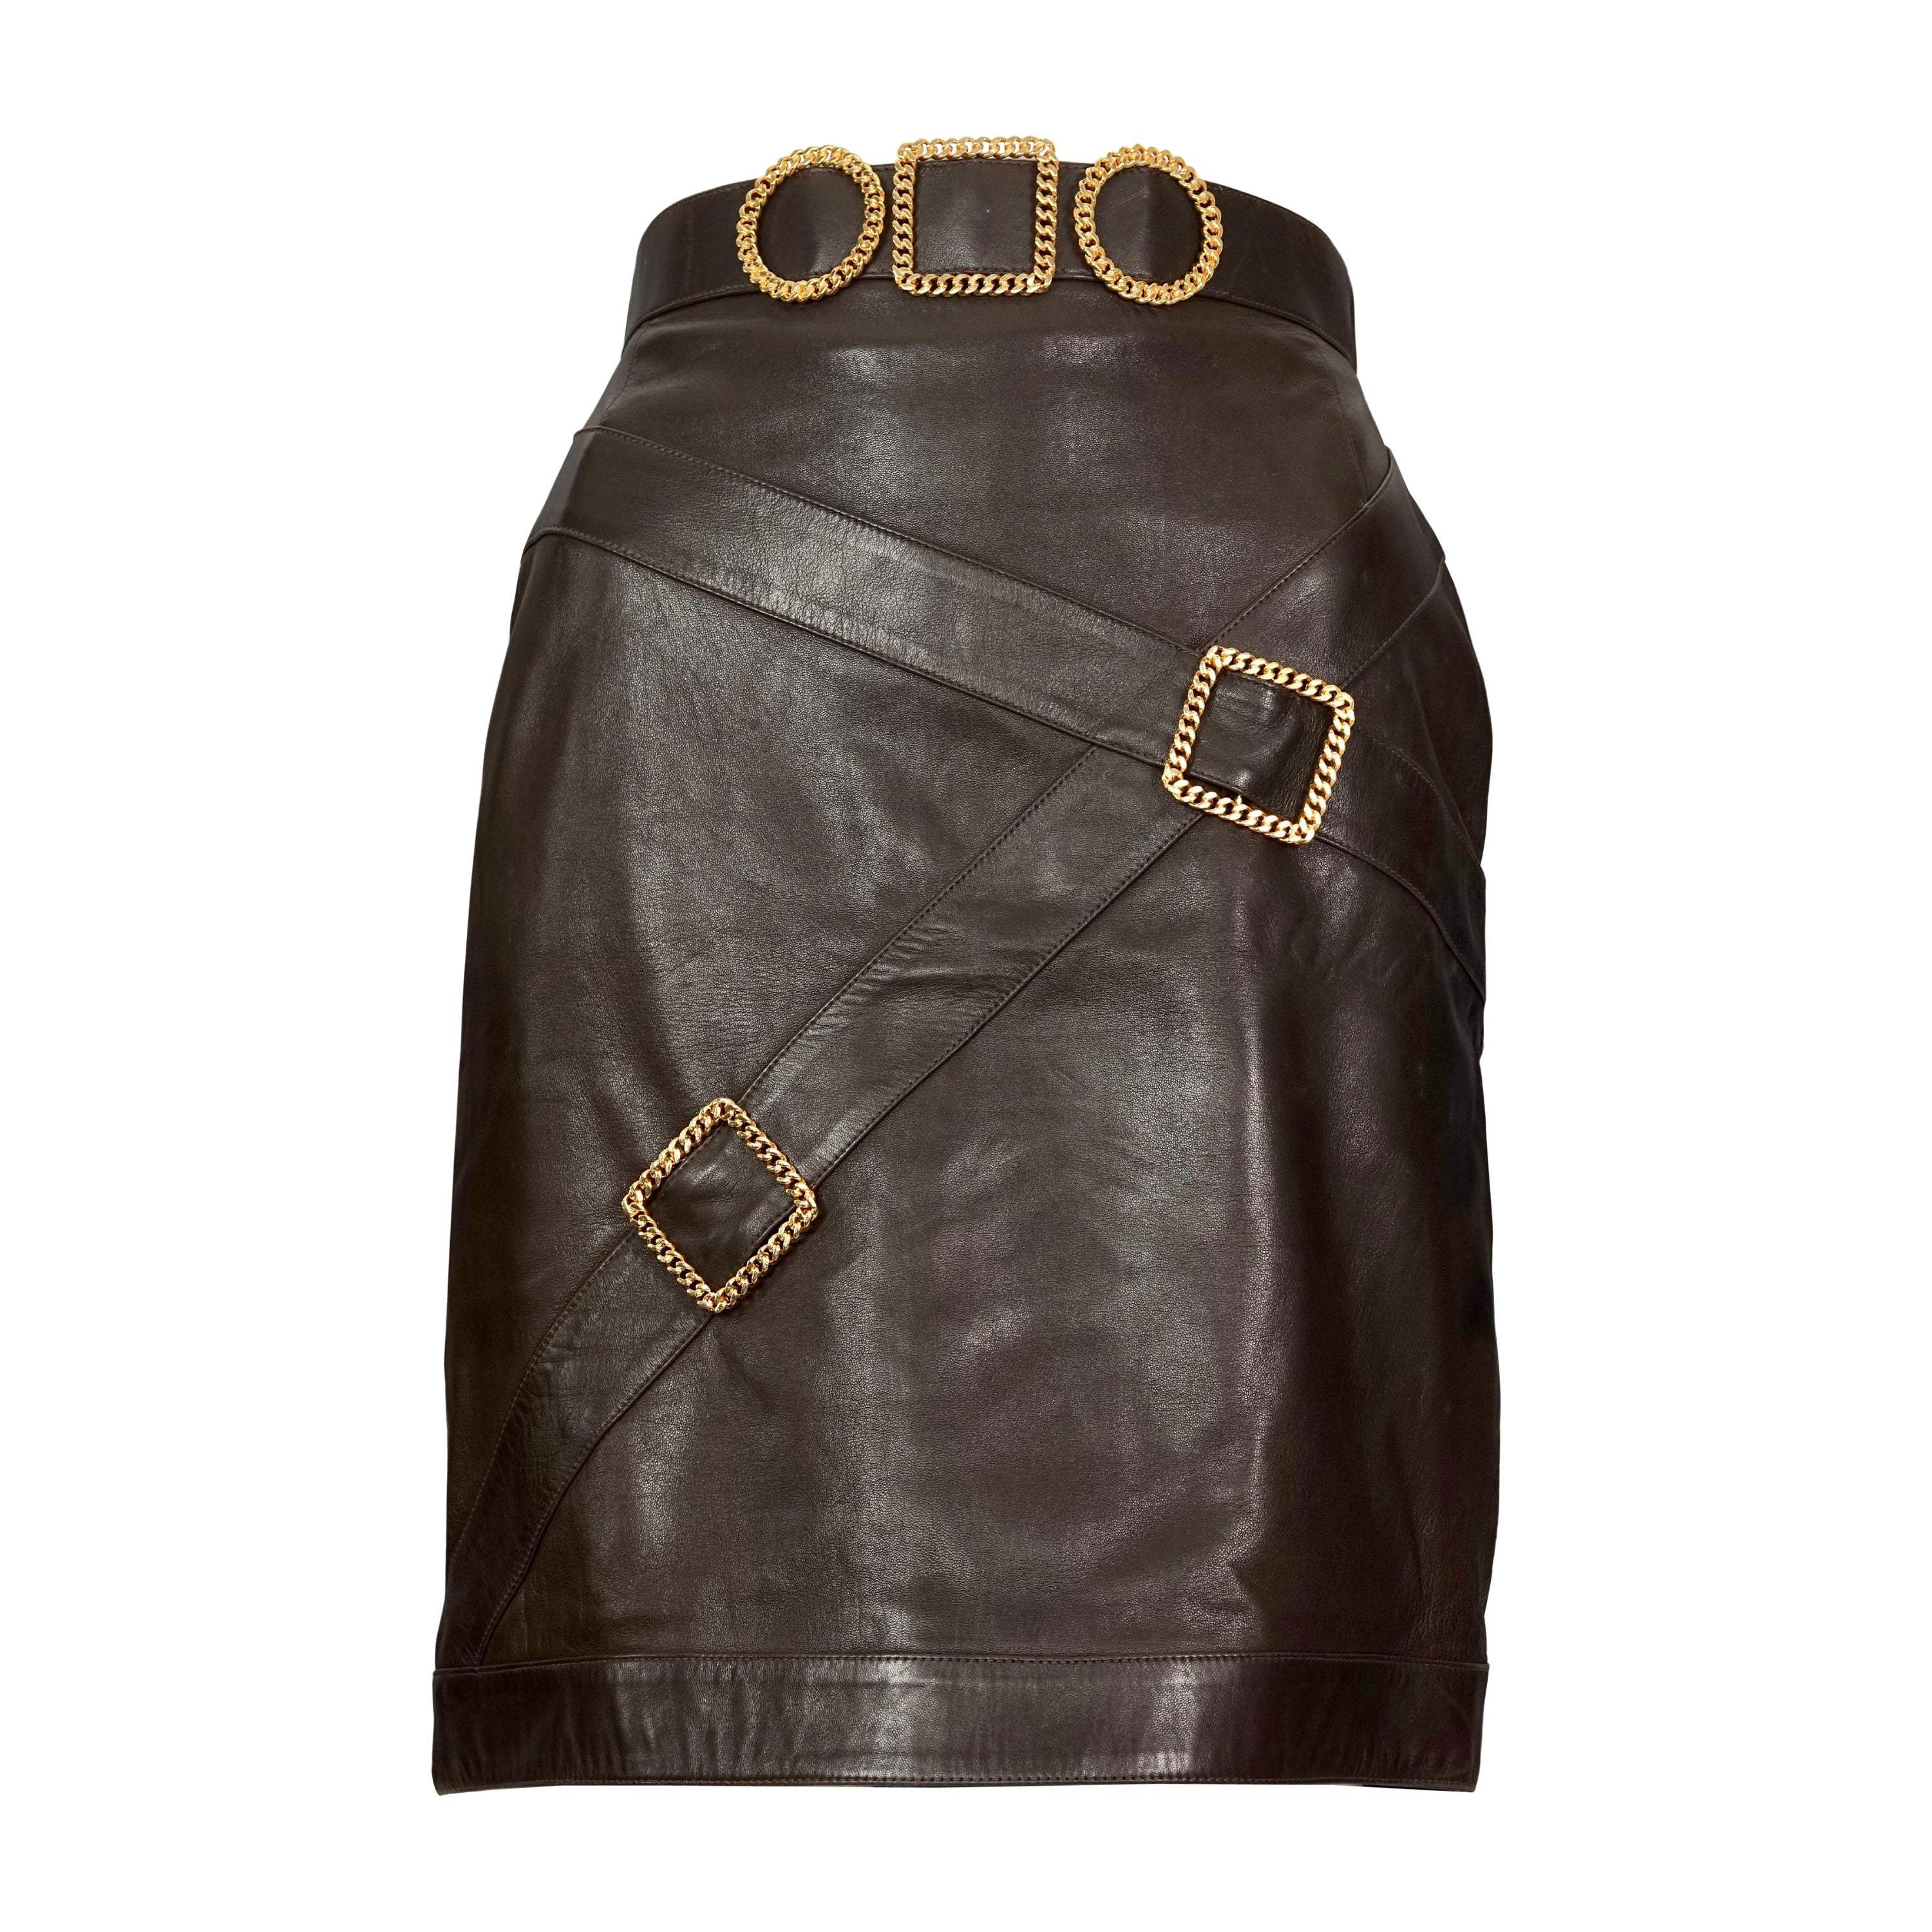 Vintage Iconic CHANEL Buckle Leather Skirt